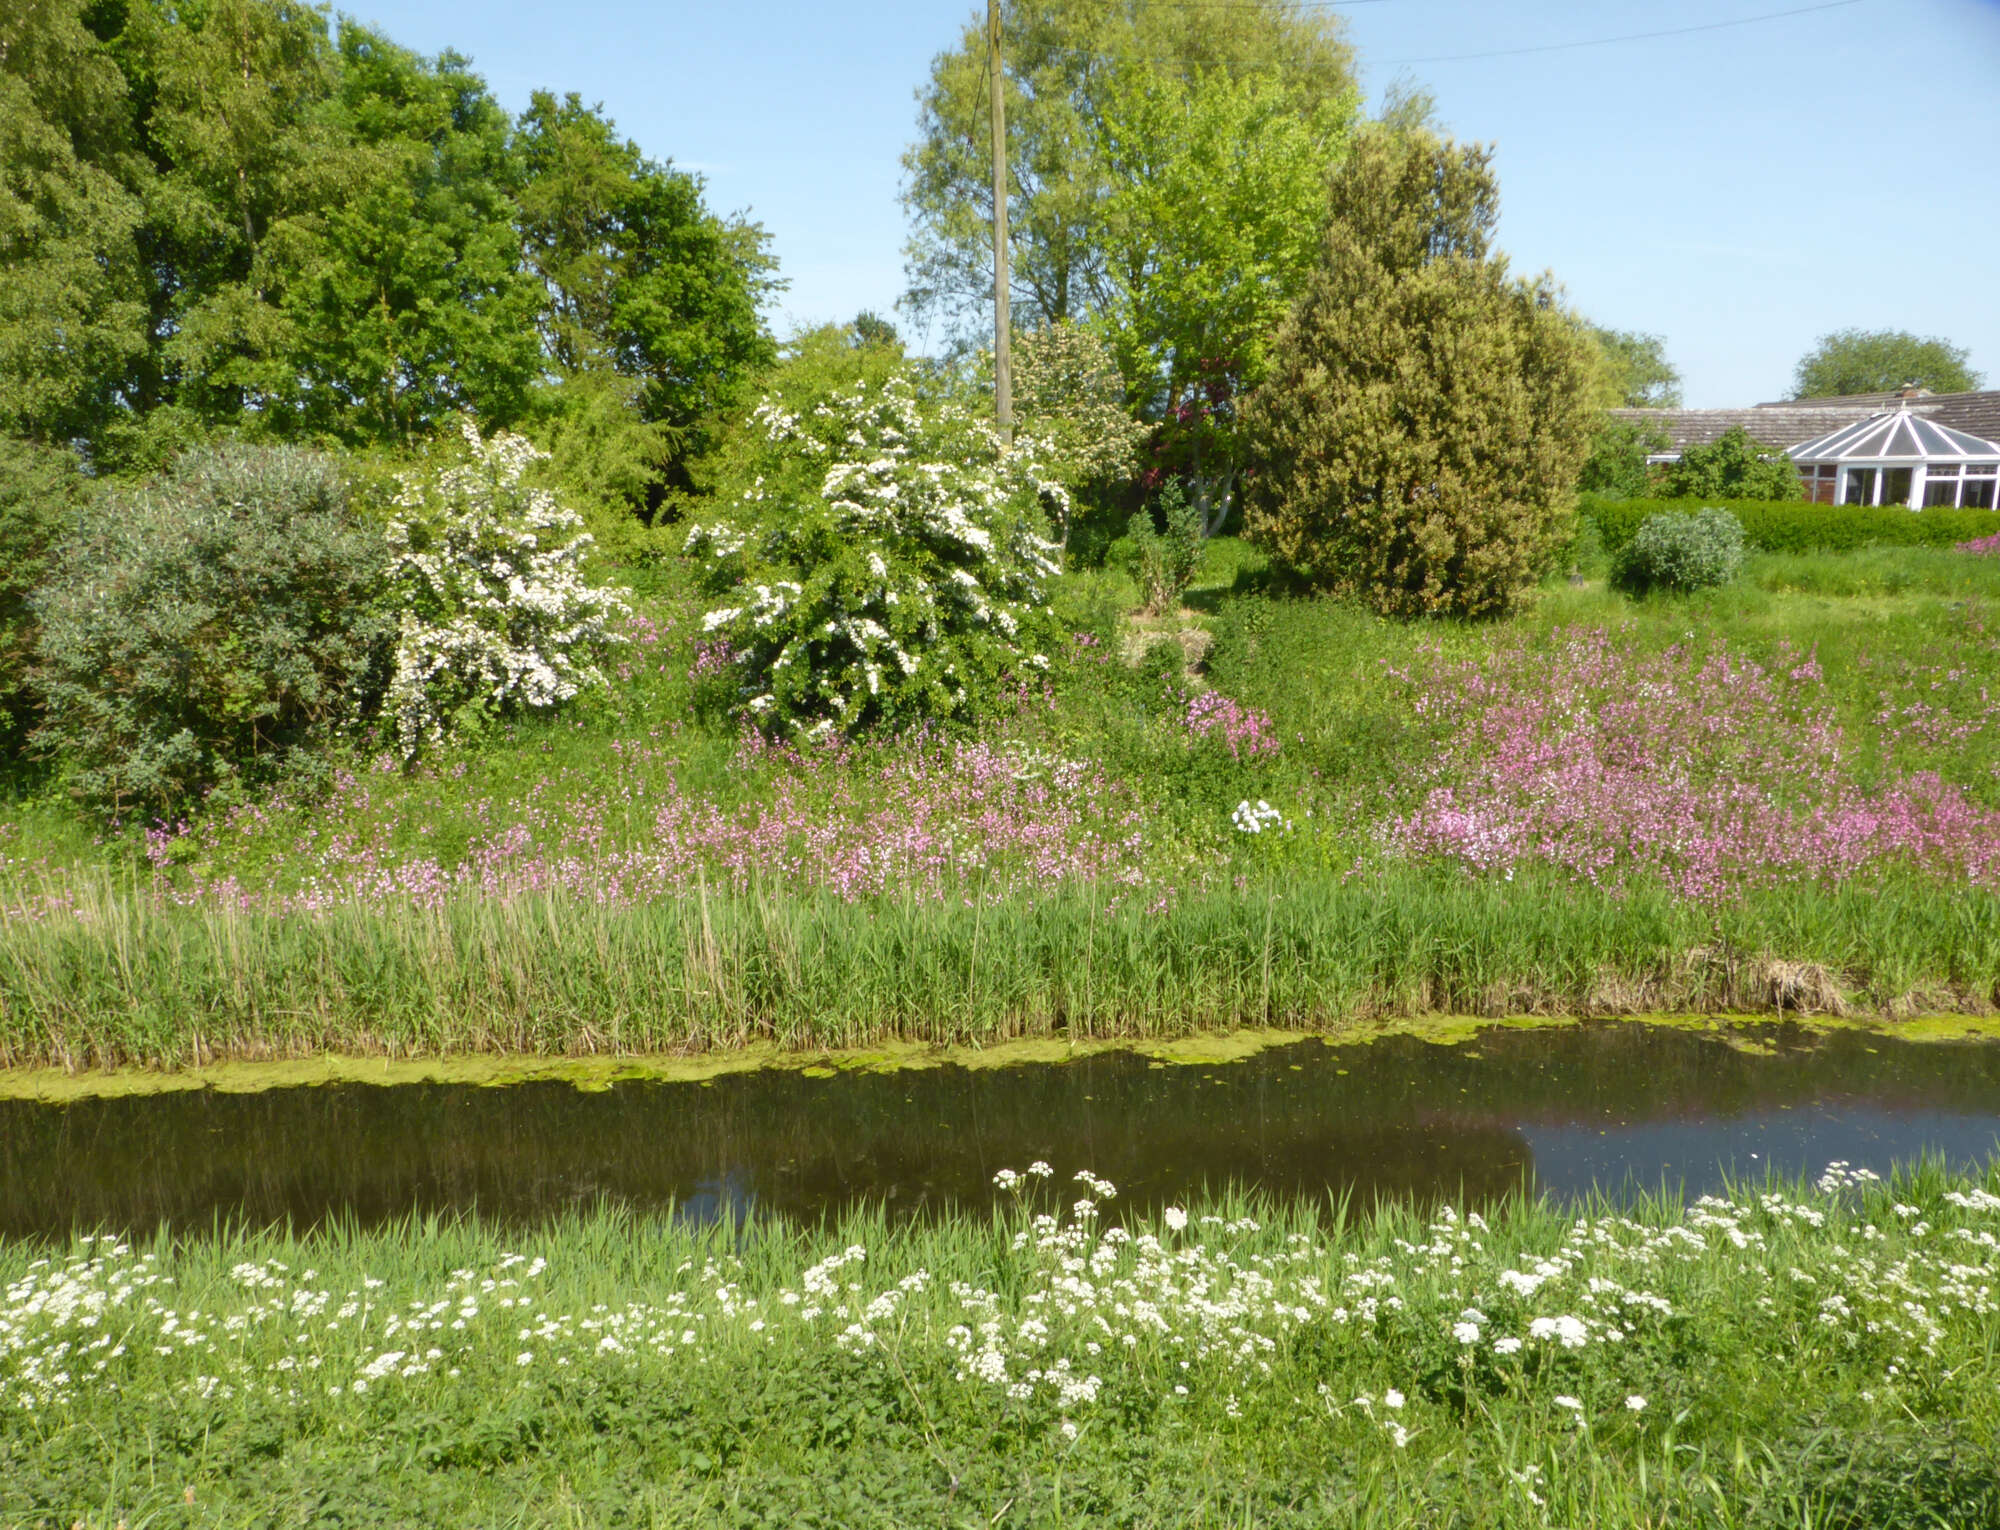 The flowery dyke banks with our woodland garden beyond.